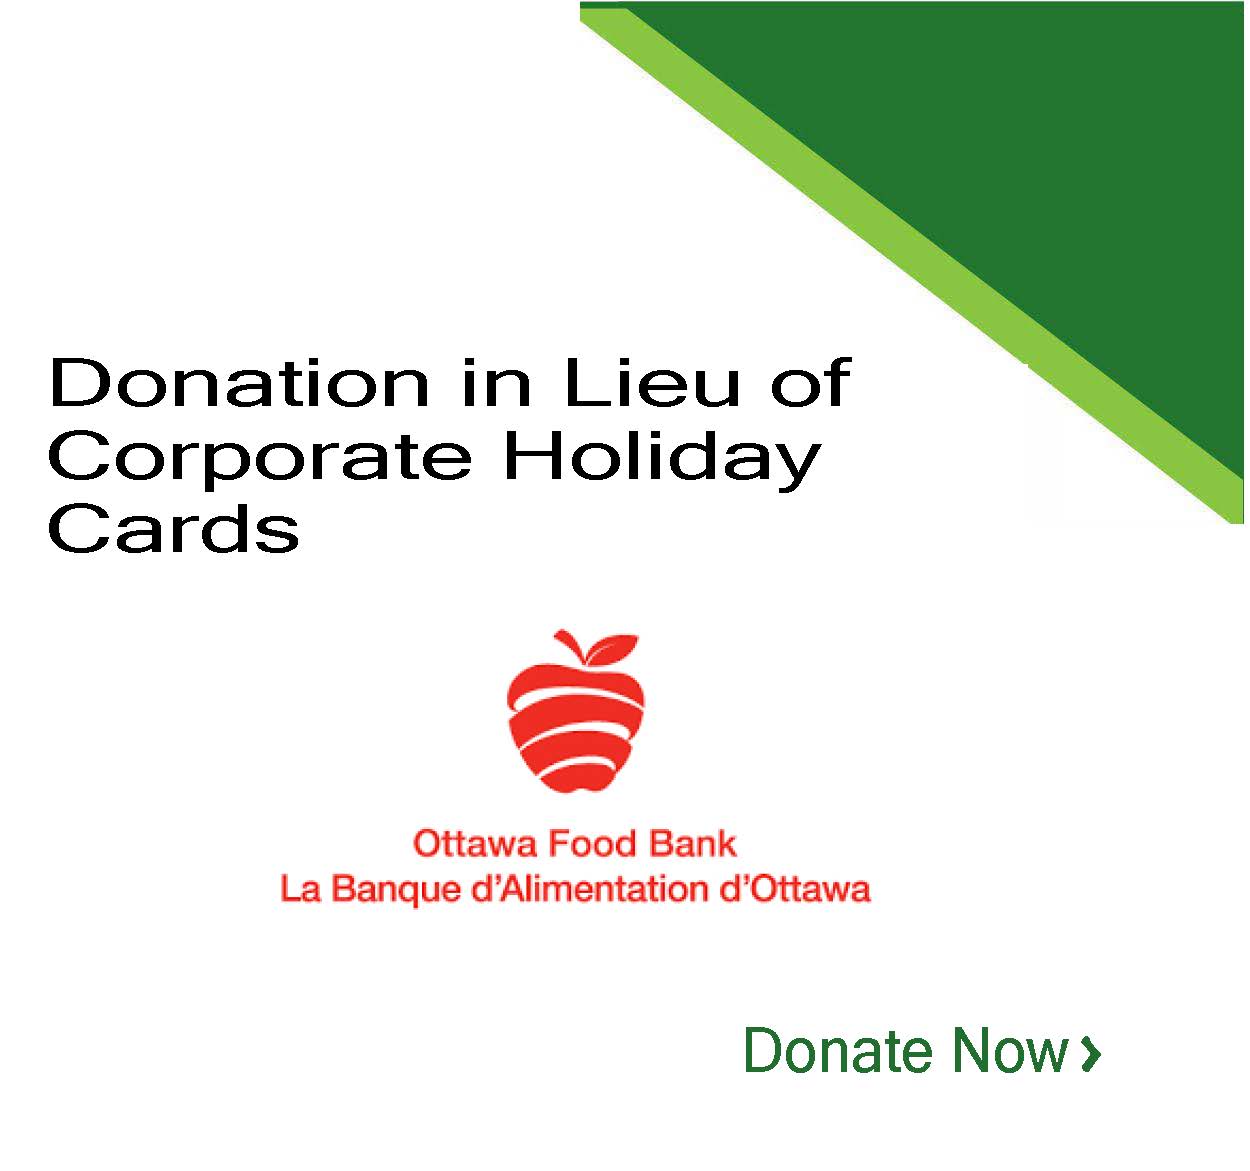 Donation in lieu of Corporate Holiday Cards